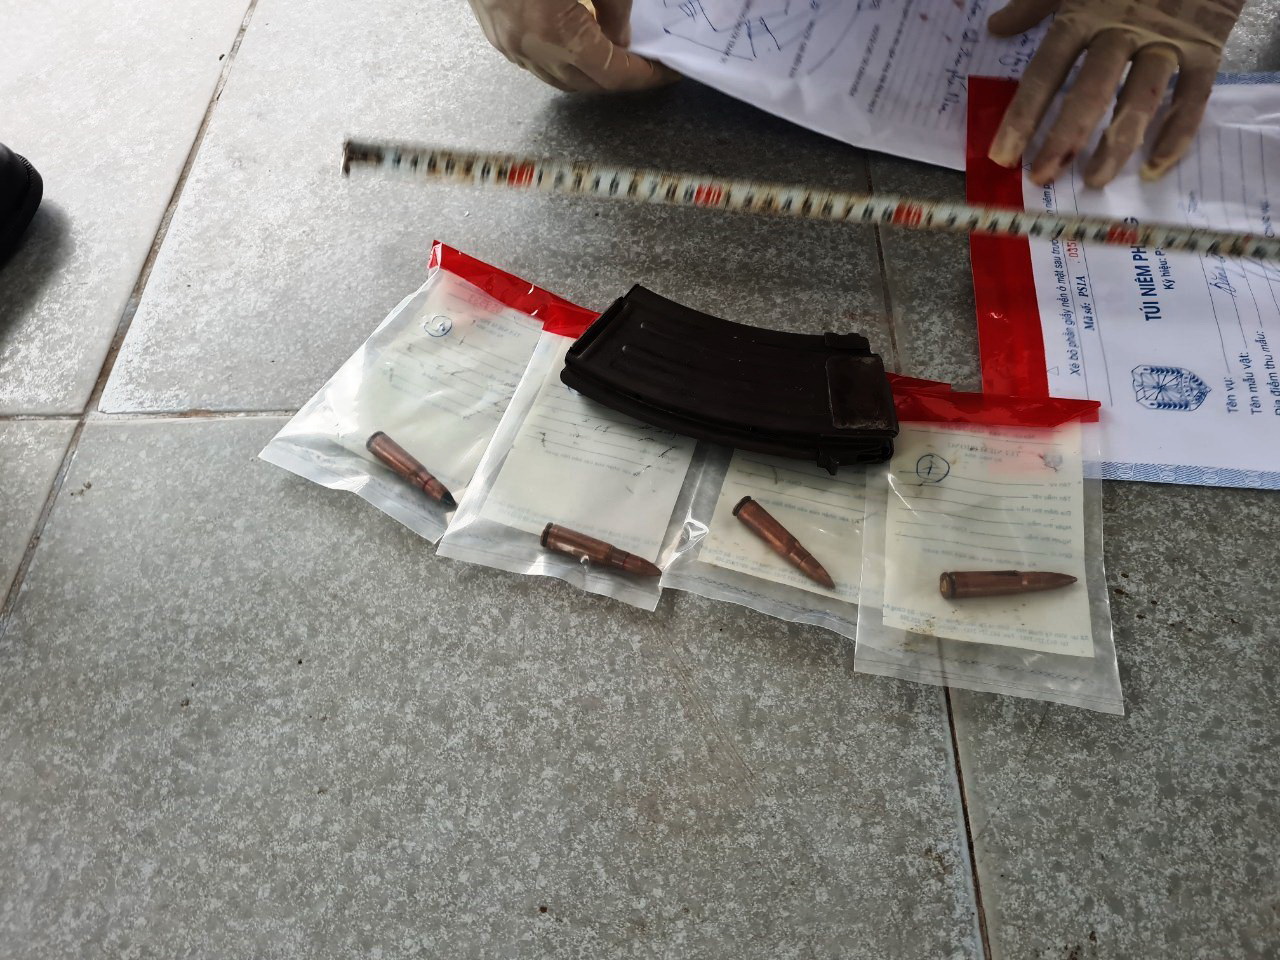 A magazine and four bullets seized at the scene of a robbery, in which a police officer raided two gold shops at Dong Ba Market in Hue City, Thua Thien-Hue Province, Vietnam, July 31, 2022. Photo: Nhat Linh / Tuoi Tre